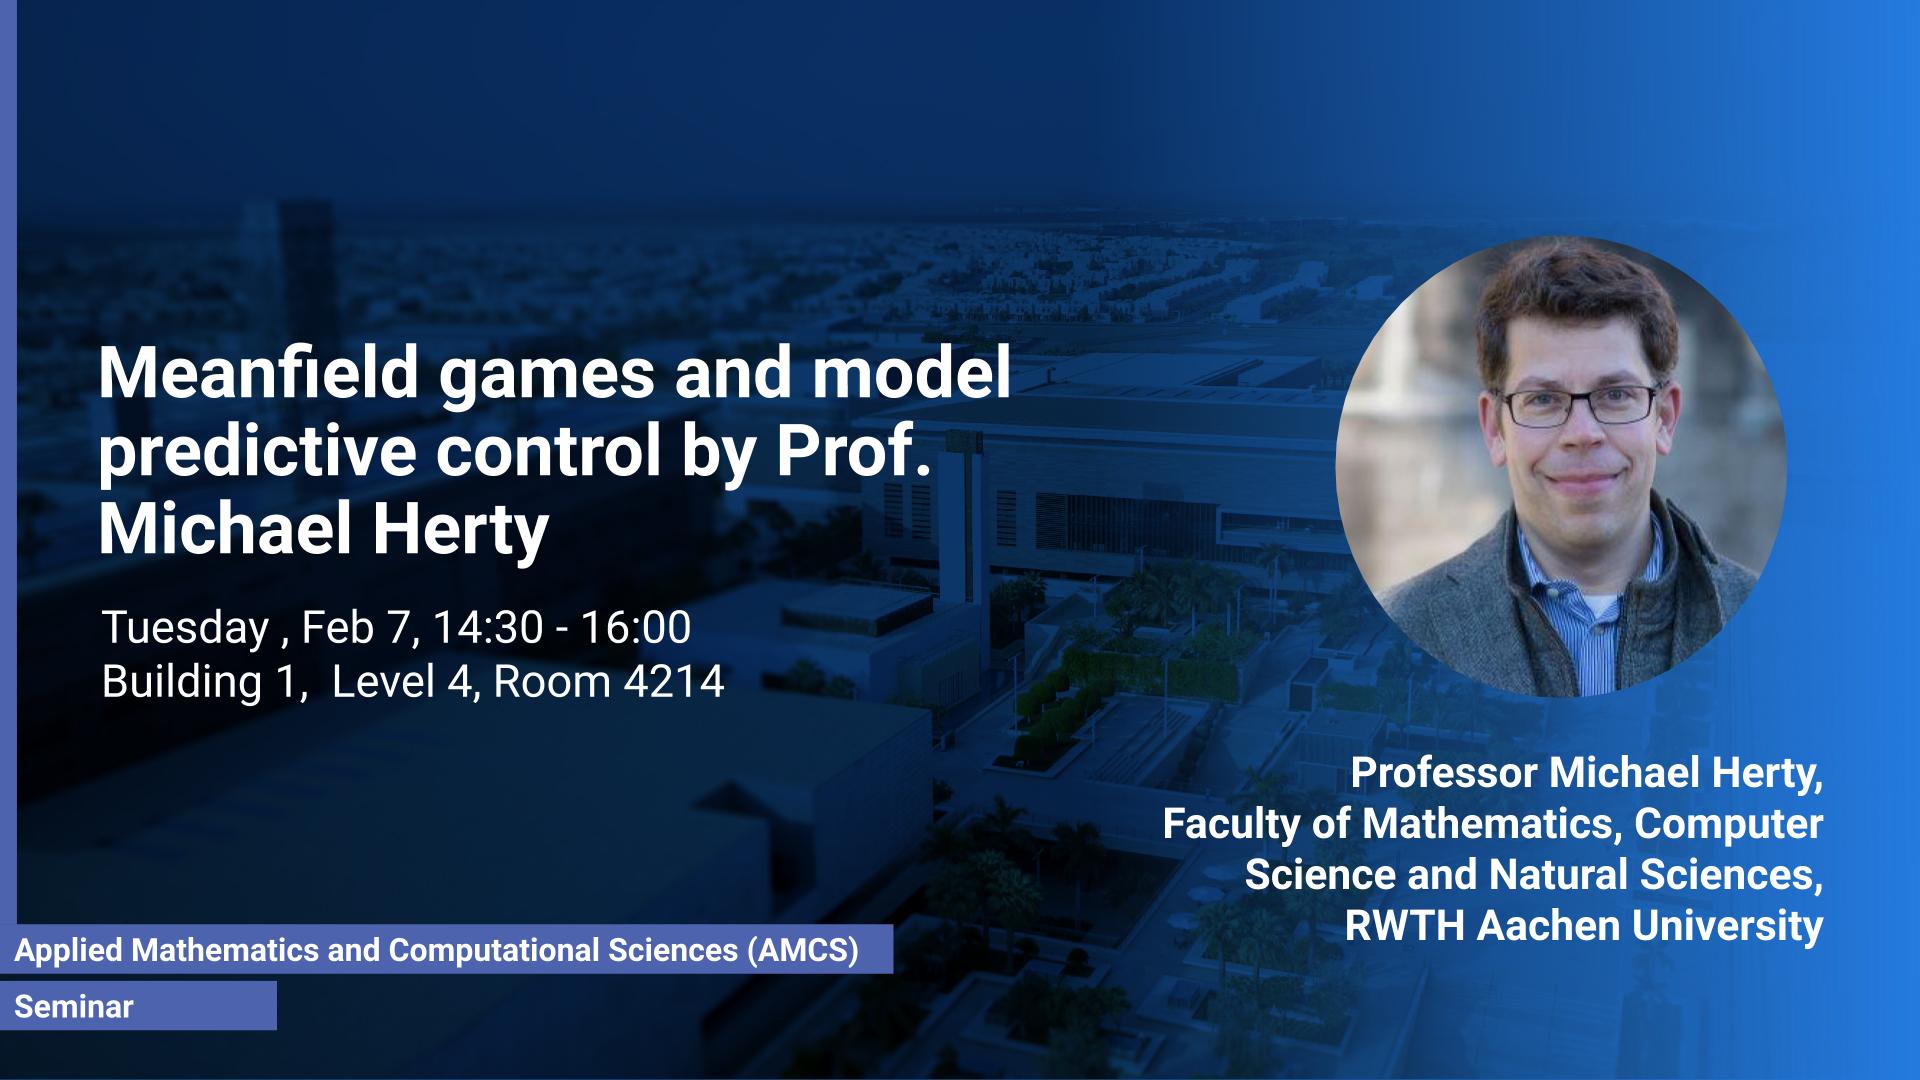 KAUST CEMSE AMCS STOCHNUM Seminar Michael Herty Meanfield Games And Model Predictive Control